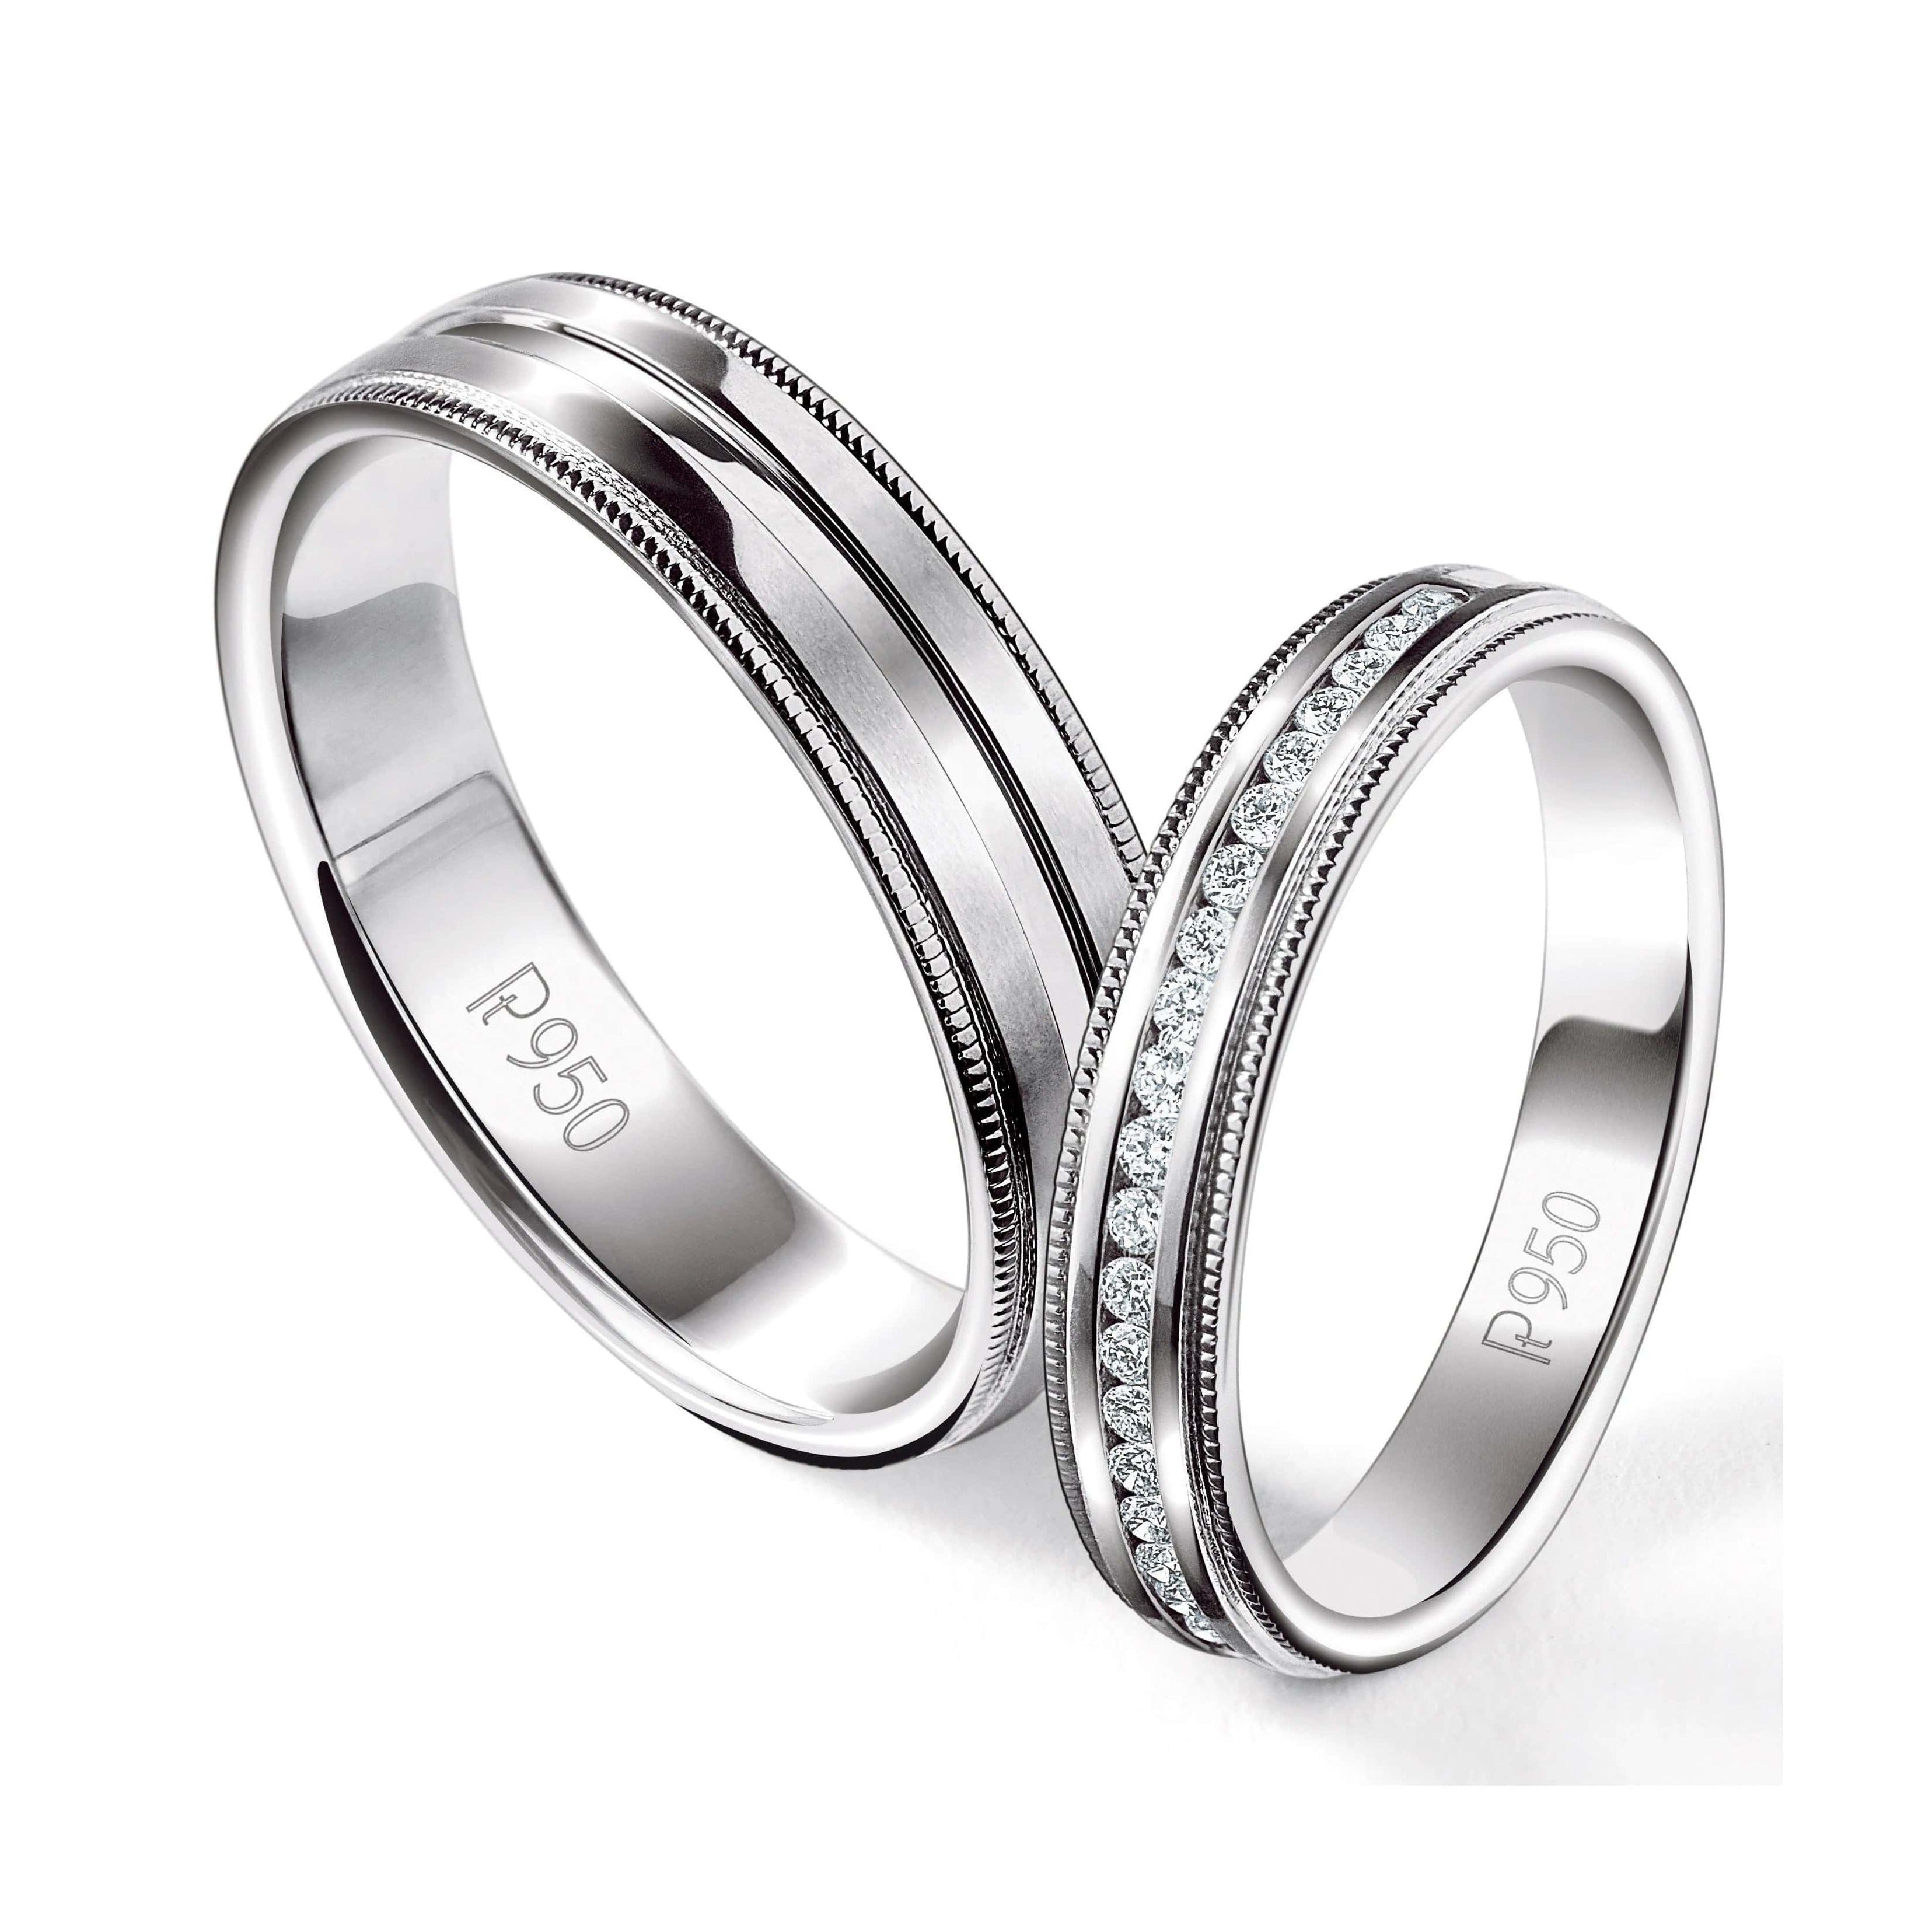 Platinum Couple Rings at Best Price in India at Candere by Kalyan Jewellers.